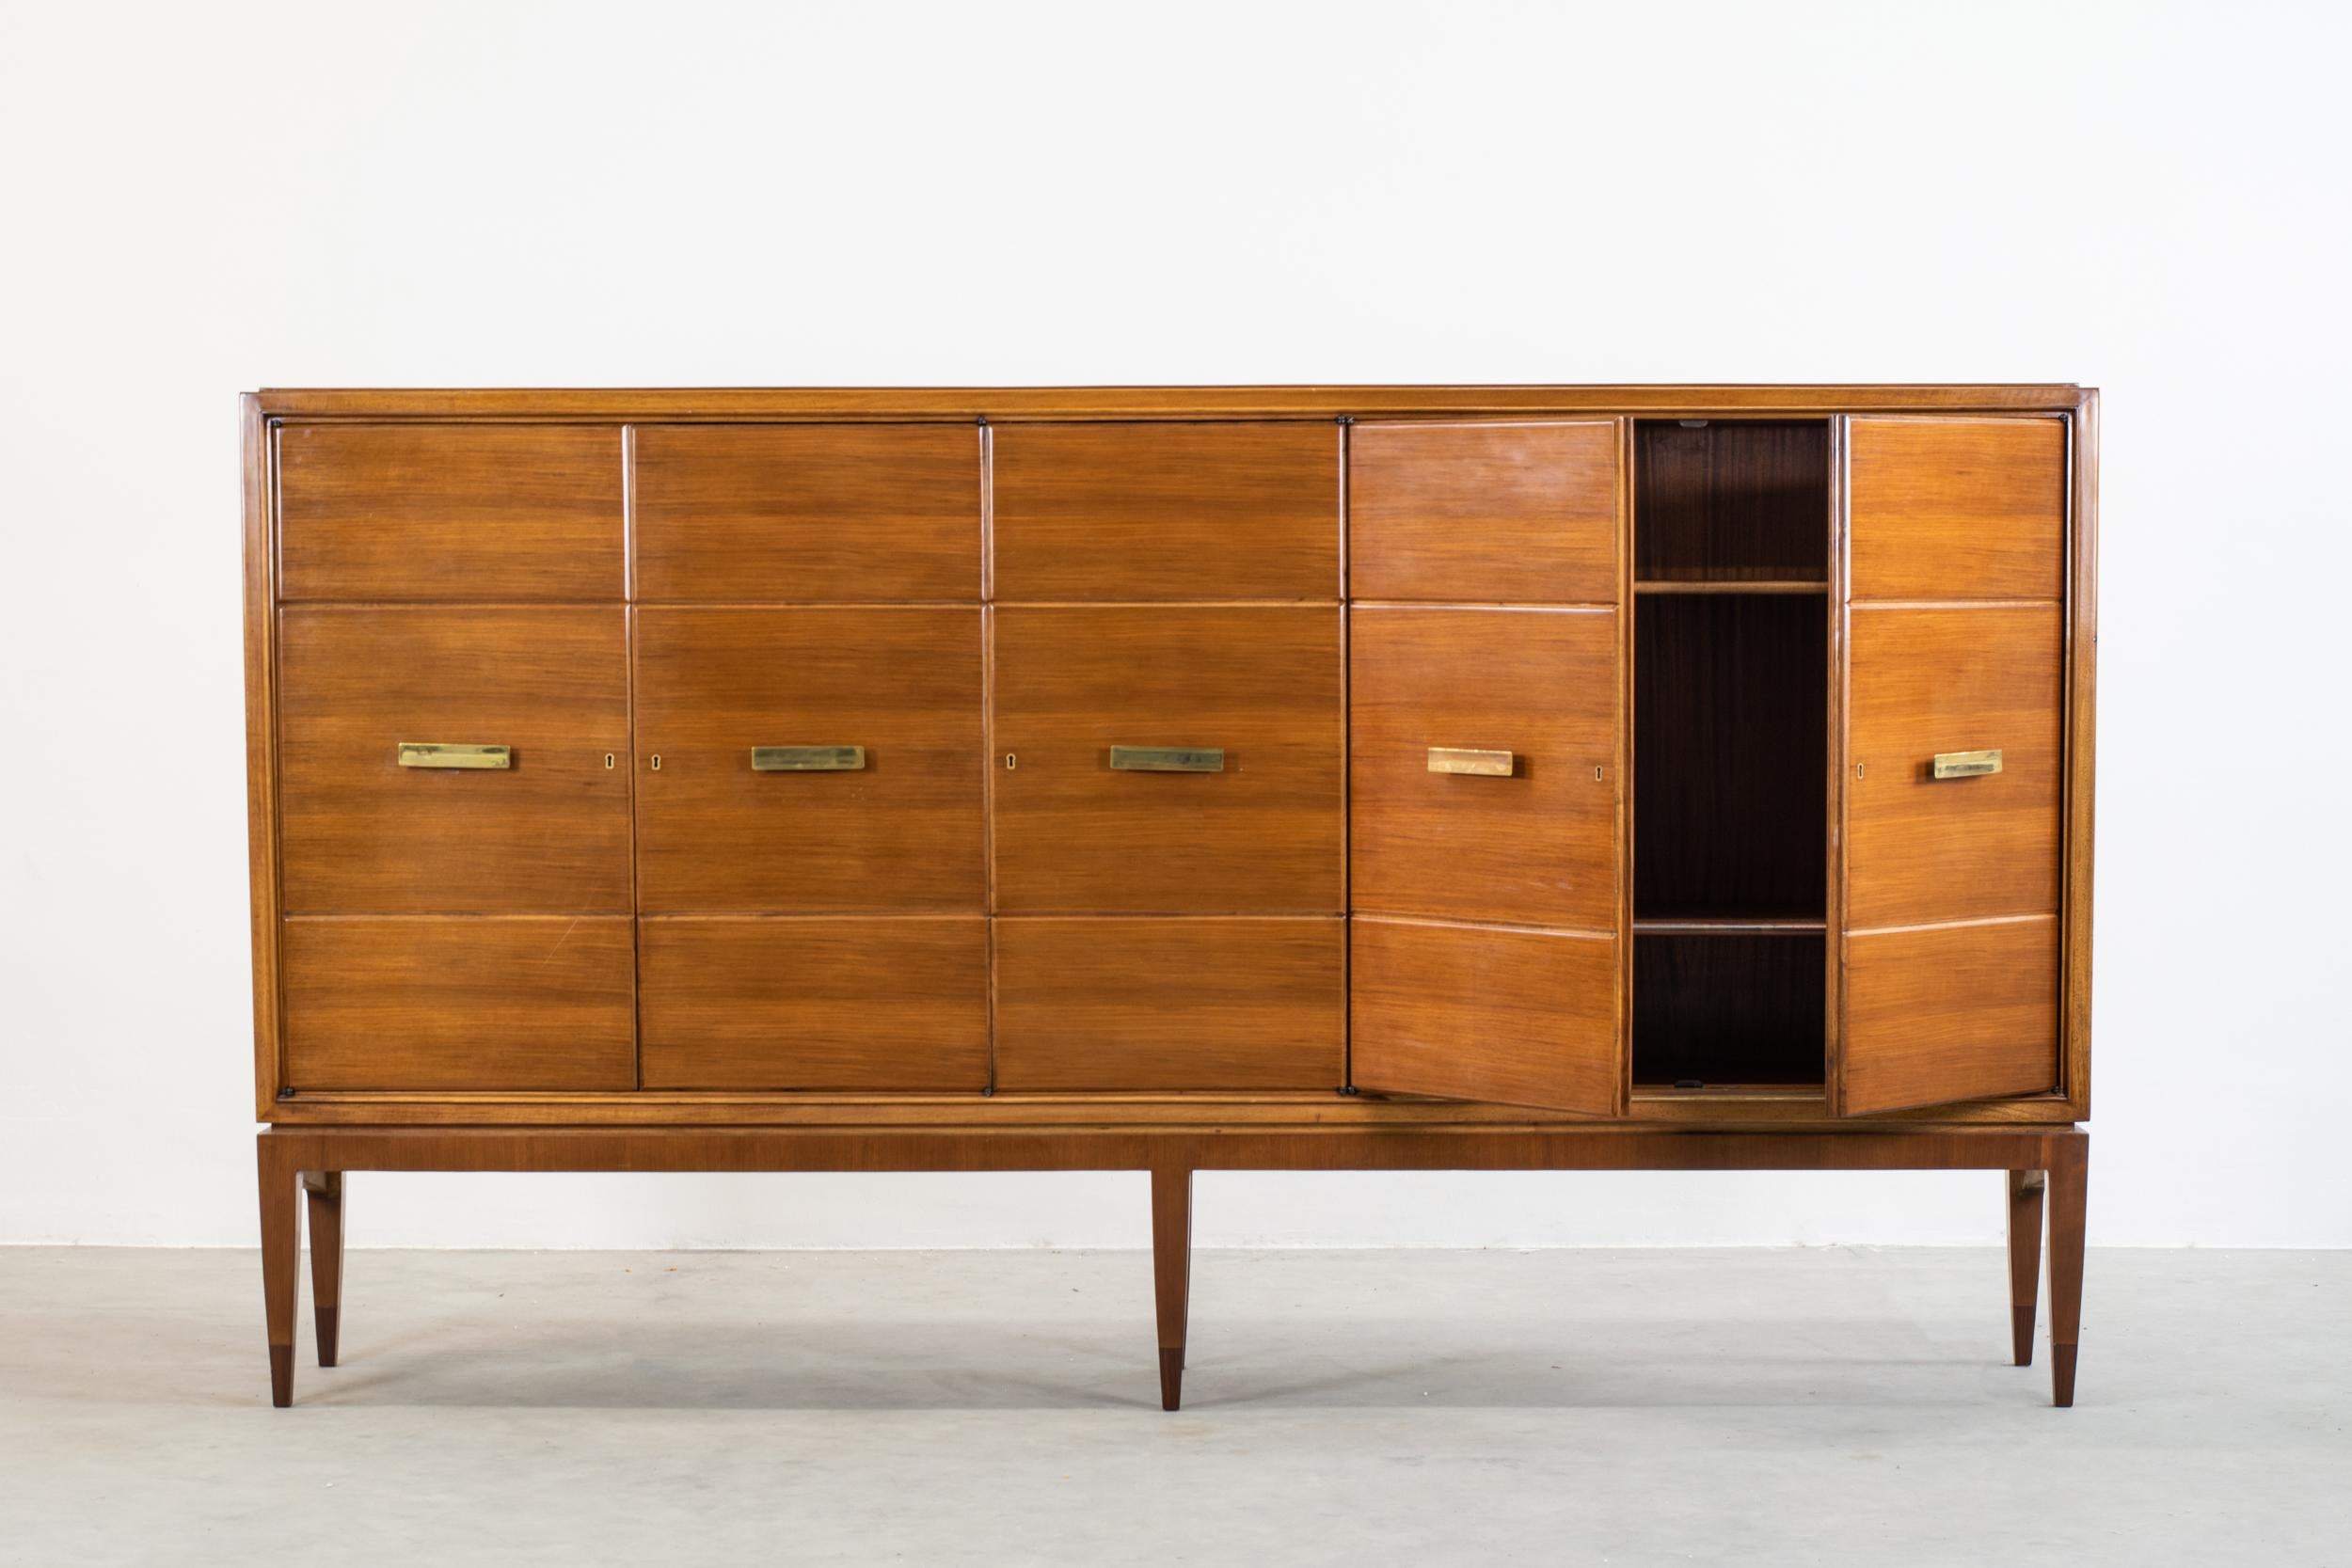 20th-Century sideboard with five doors and inner shelves in walnut veneer with brass handles and keys. 
Designed by Gio Ponti and manufactured by Singer & Son between the late 1940s and the early 1950s.
The sideboard has accompanied the authenticity